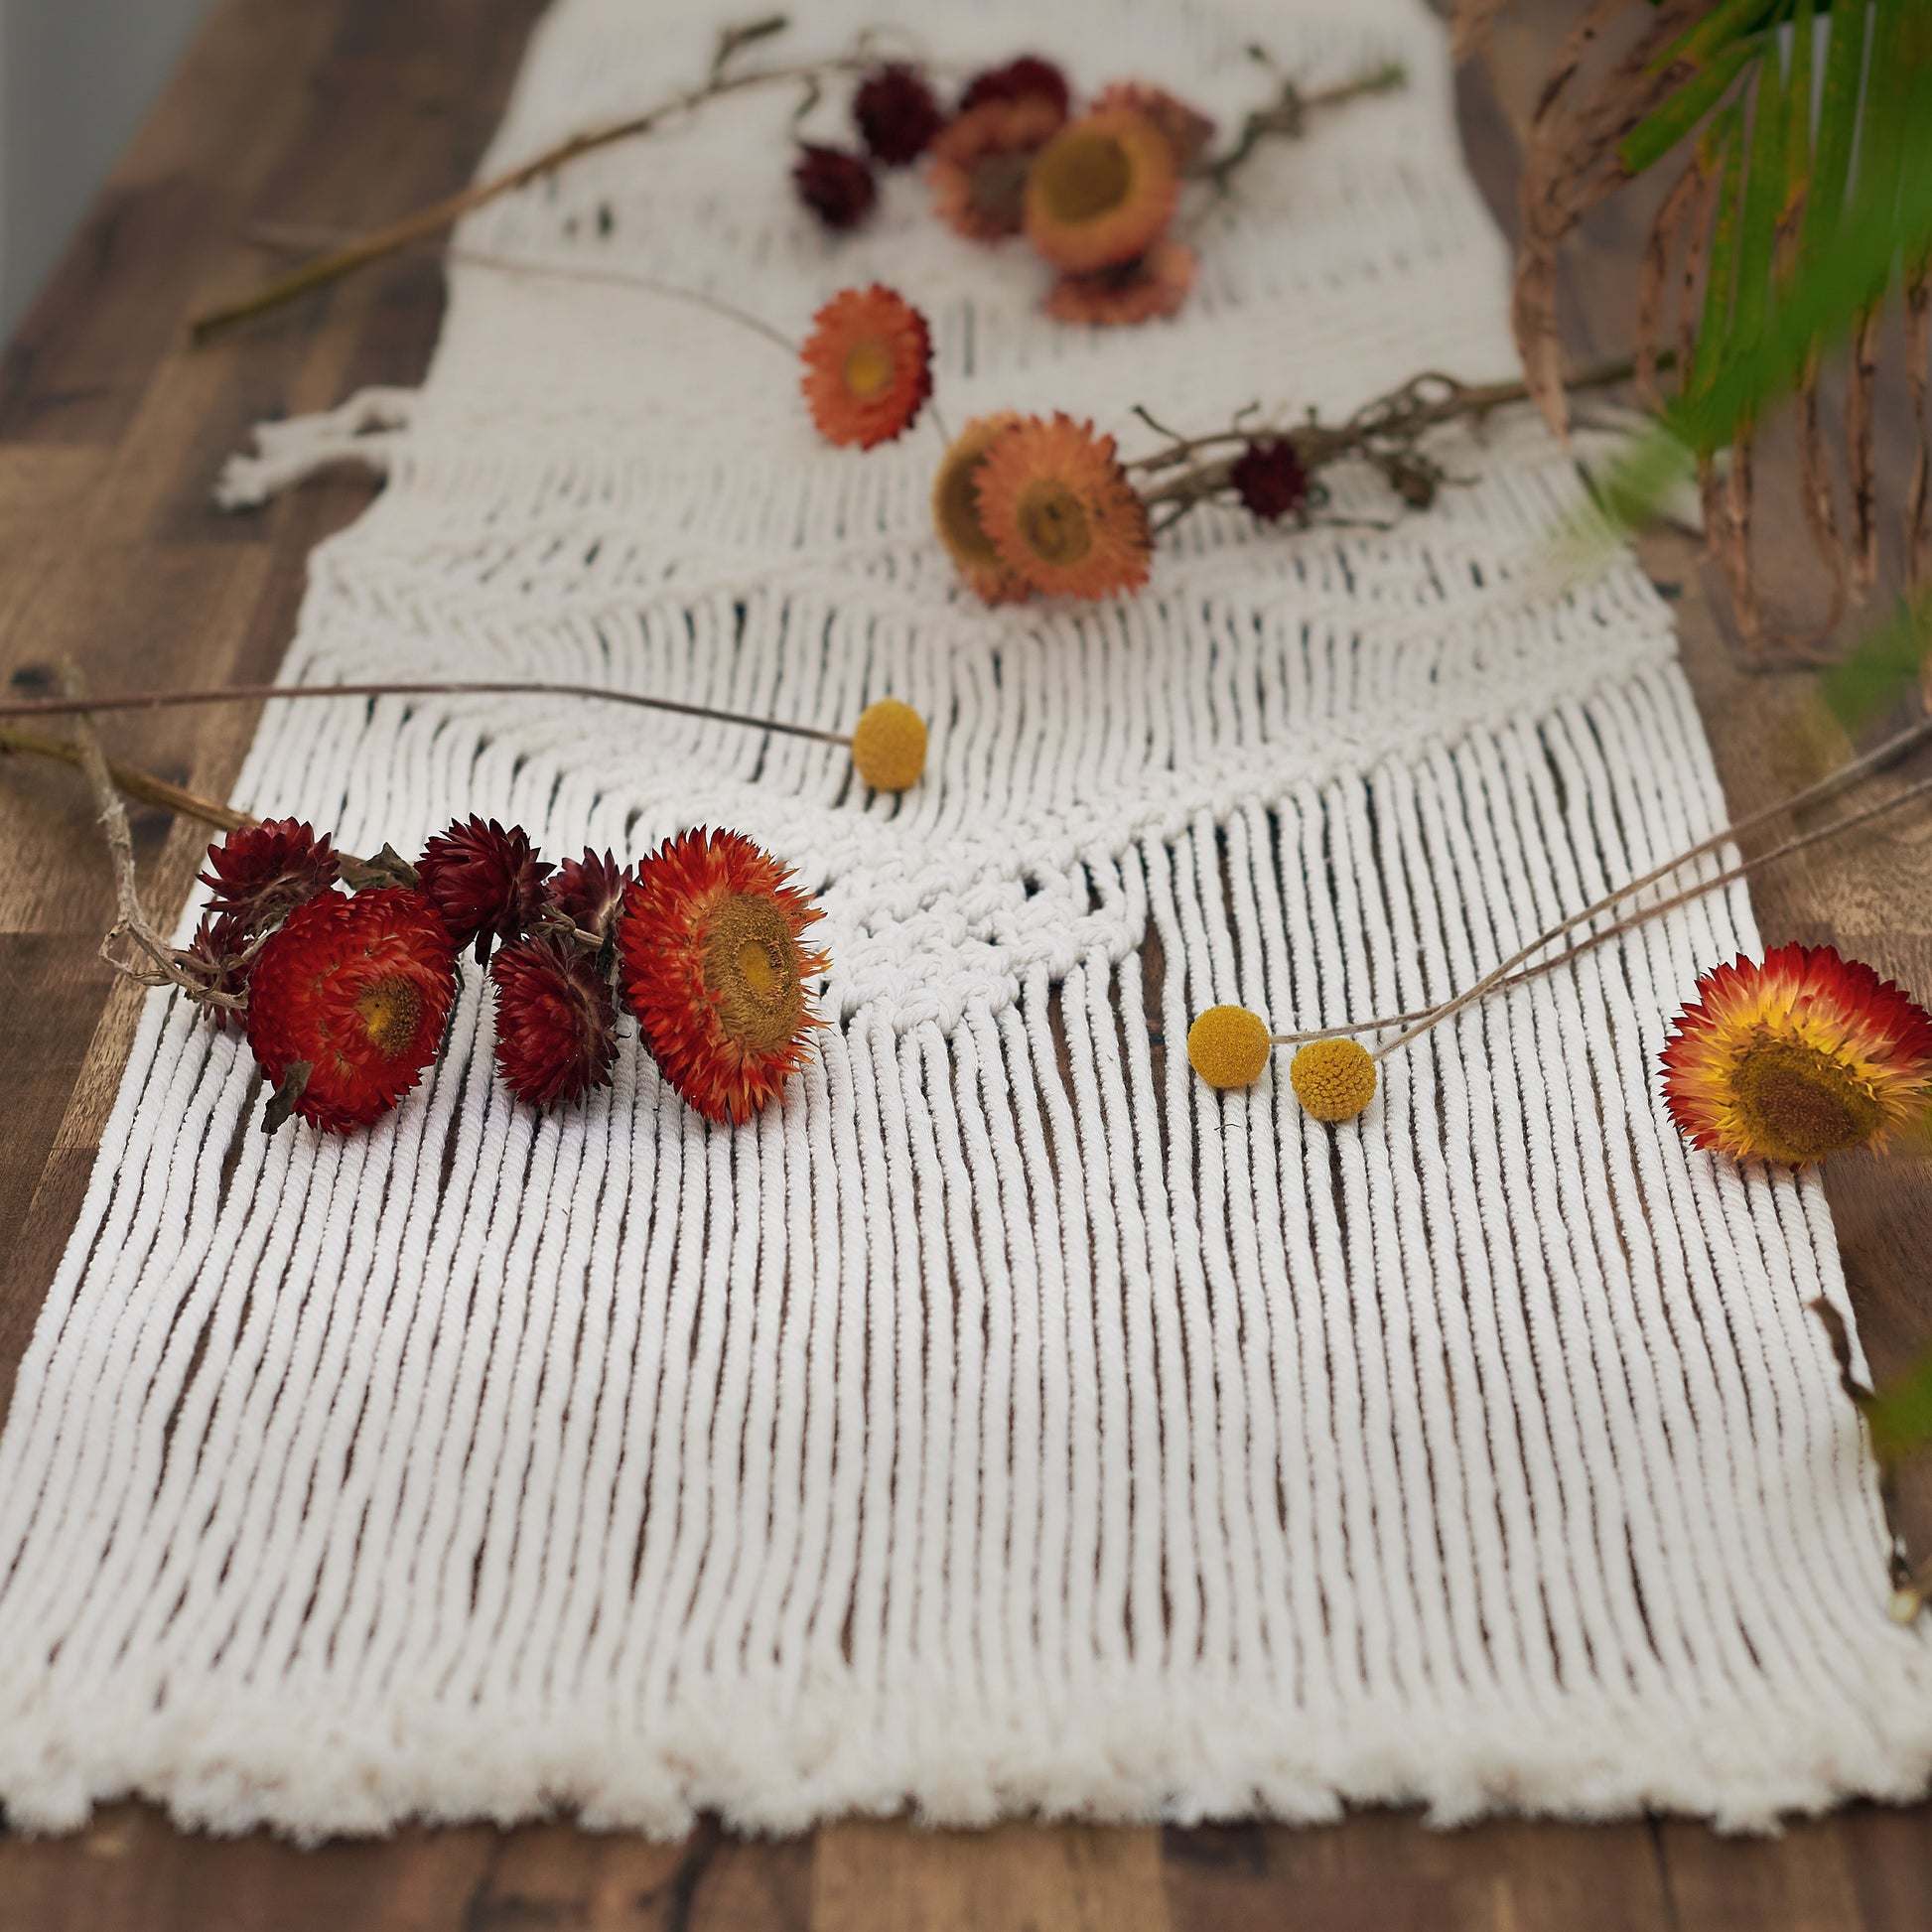 Macrame table runner on a wooden table decorated wit dried red flowers